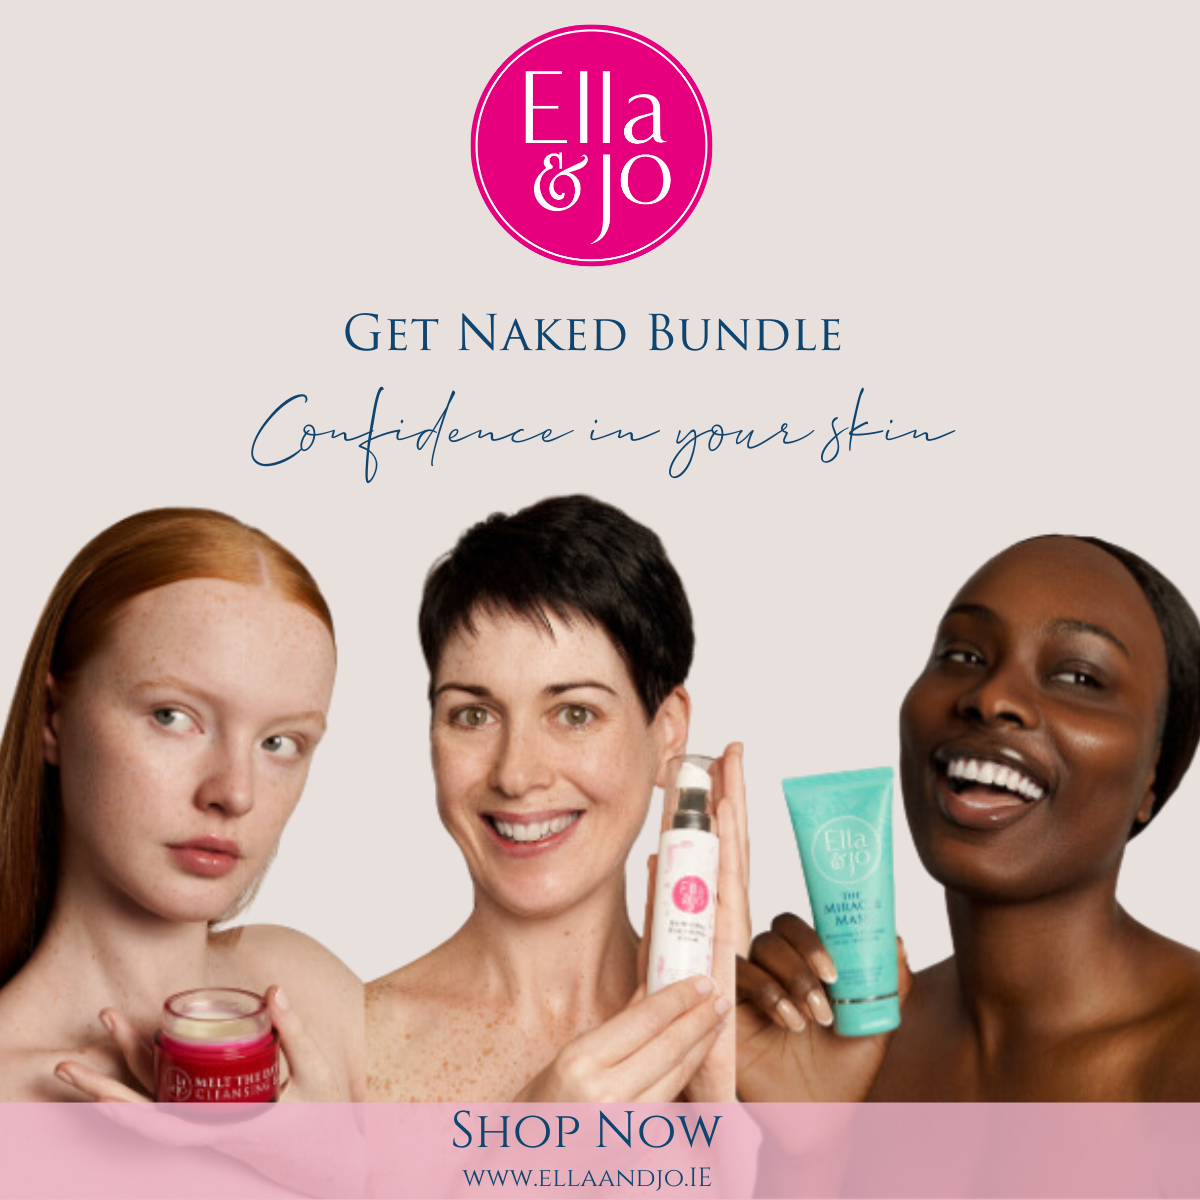 Get Naked with Ella & Jo